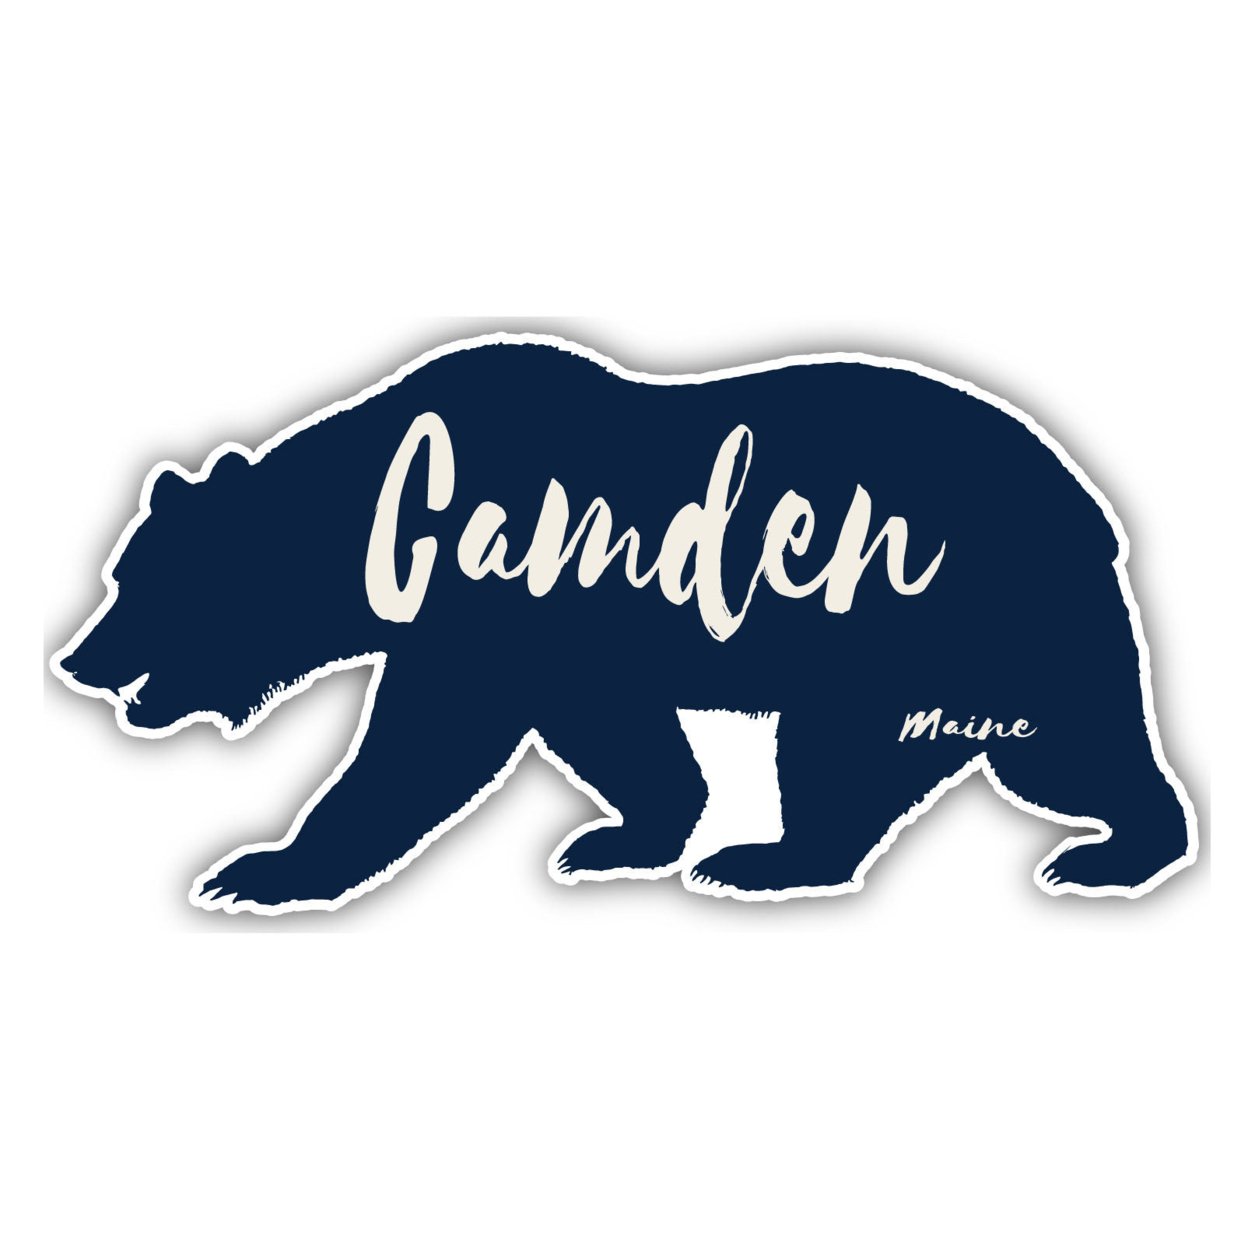 Camden Maine Souvenir Decorative Stickers (Choose Theme And Size) - 4-Pack, 6-Inch, Tent